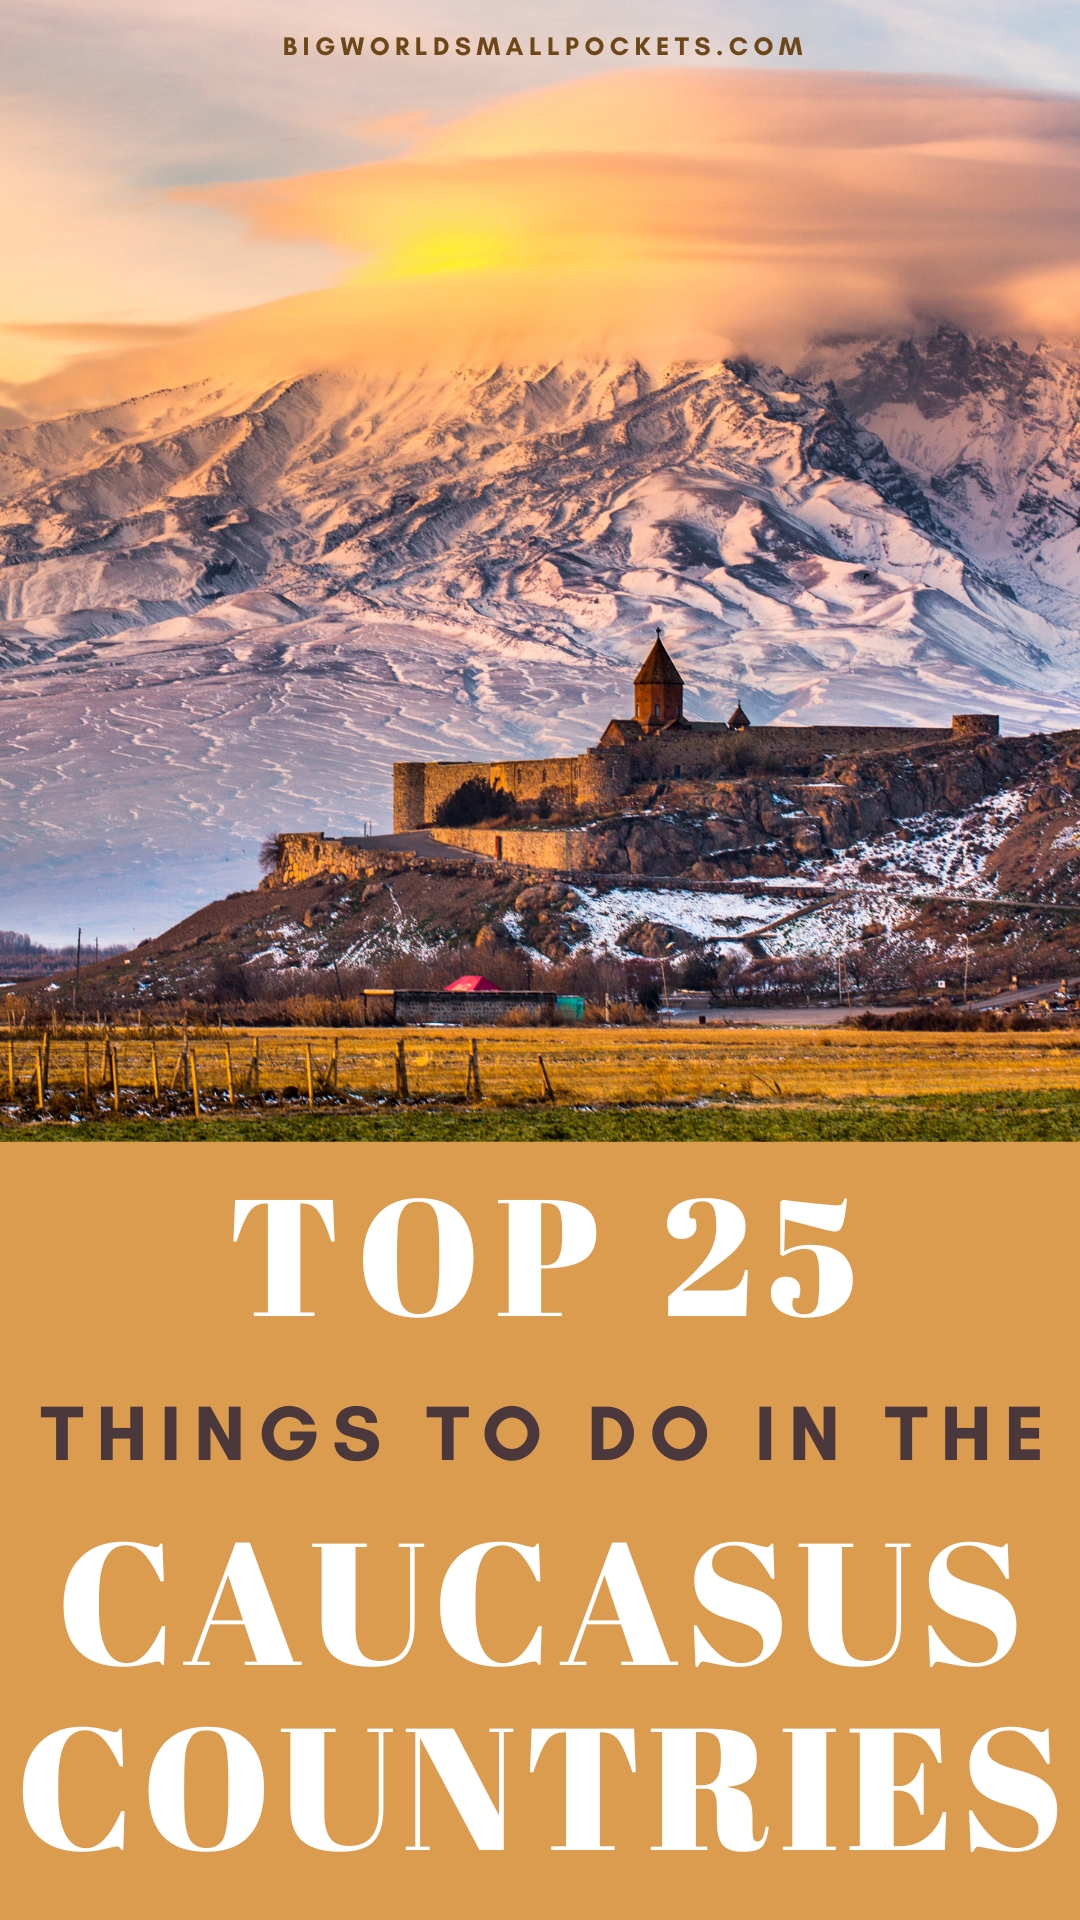 Top 25 Things To Do in the Caucasus Countries